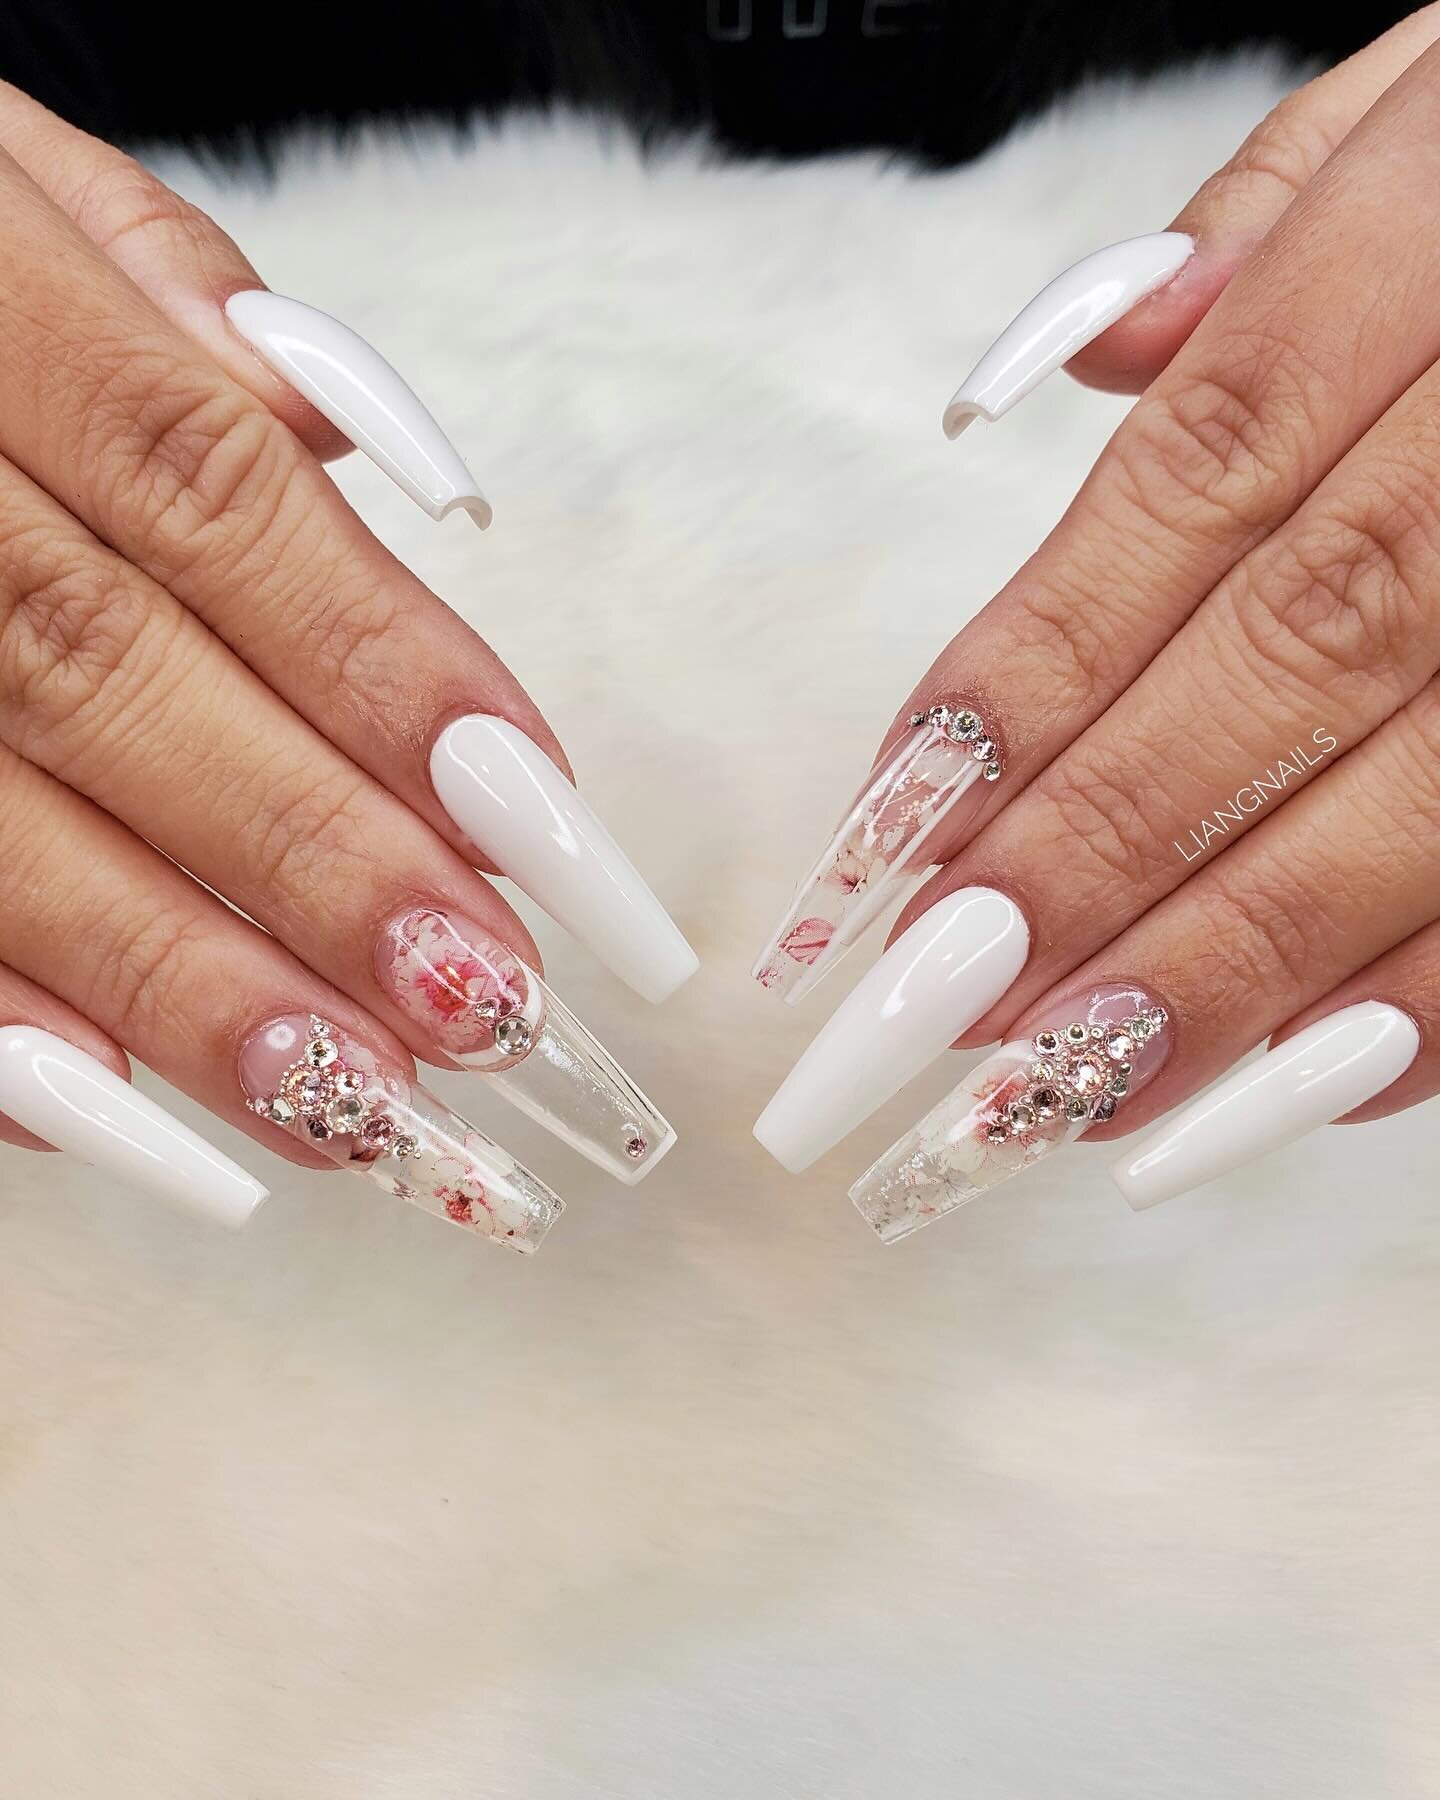 Floral freestyle with a touch of glam 🌸💎 @apresnailofficial

Limited appointments left for April, DM to inquire/book 🩵